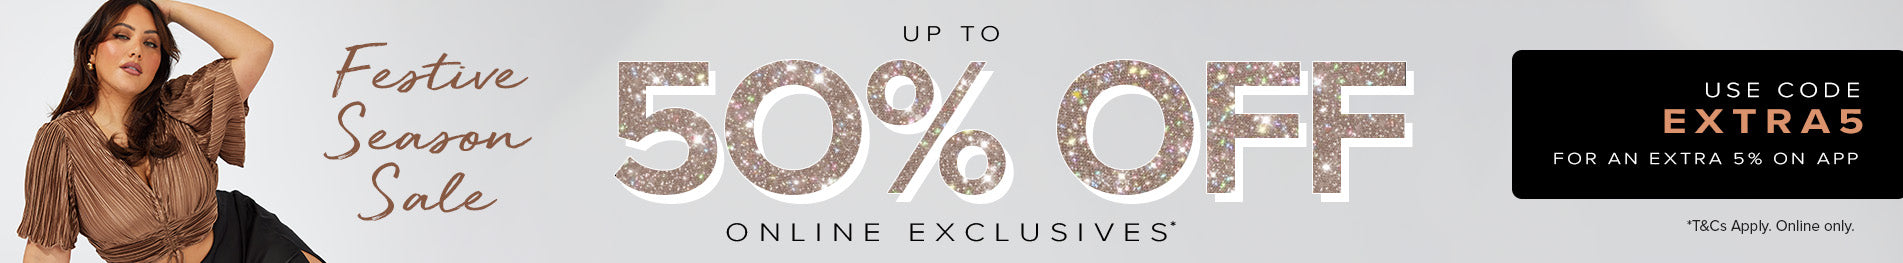 Festive Season Sale Up To 50% OFF Online Exclusives You and All Curvy Plus Size Tops Pants Dresses